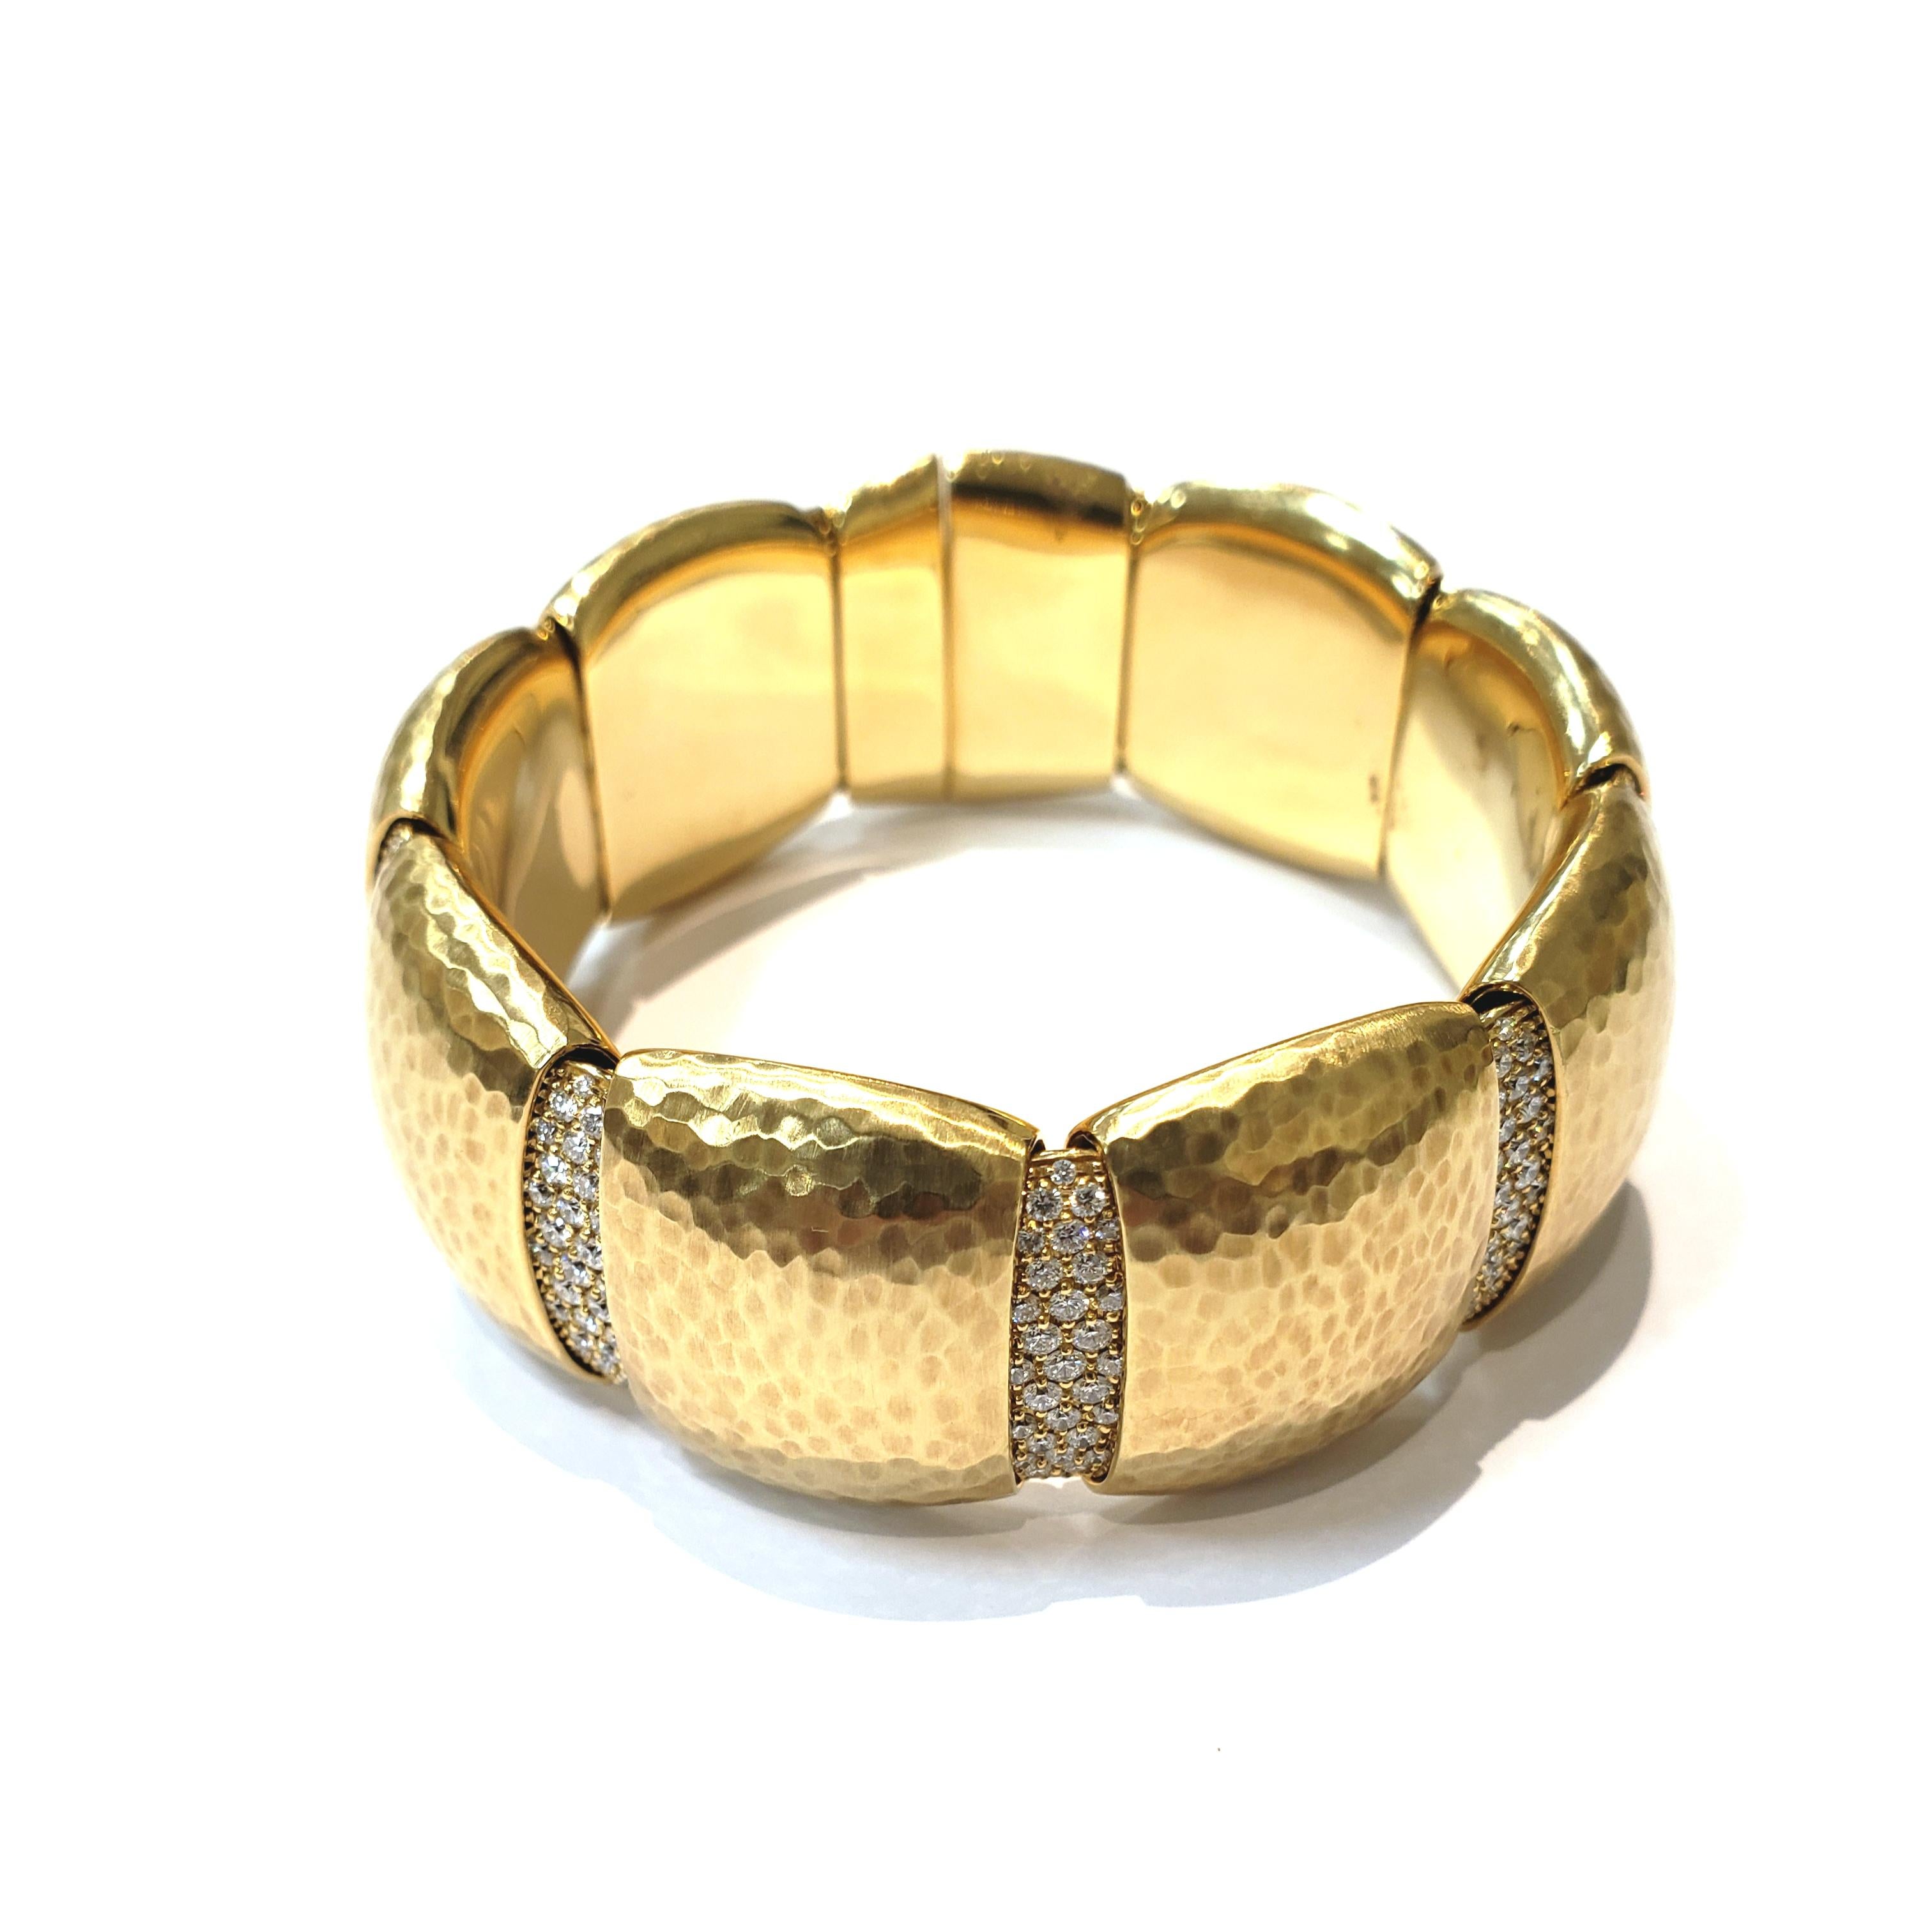 Italian Made 18 Karat Yellow Gold Hammered Bangle with Pave Diamond Stations. Bracelet is Flexible With Tongue Style Clasp.
Between Each Hammered Section Is a Pave Diamond Section. Overall Length is 7.1 Inches. Bracelet Weight is 60.50 DWT.
Bracelet